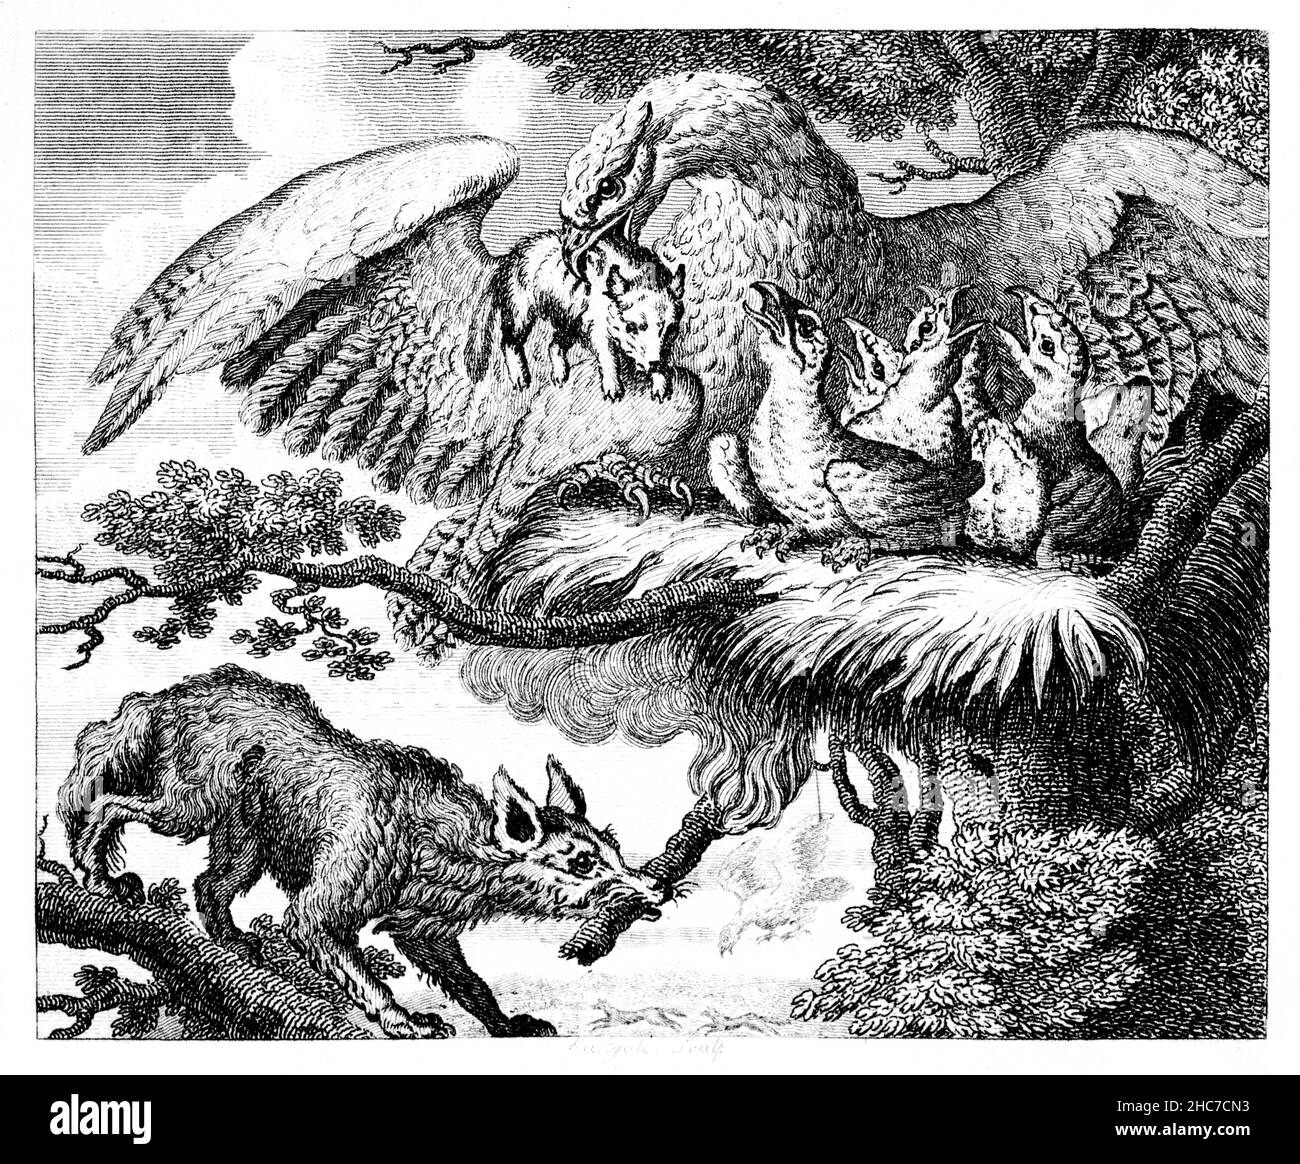 engraved illustration of The Eagle and the Fox, a tale of friendship, betrayed and revenged, from 1793 First Edition of Stockdale’s Aesop’s Fables Stock Photo